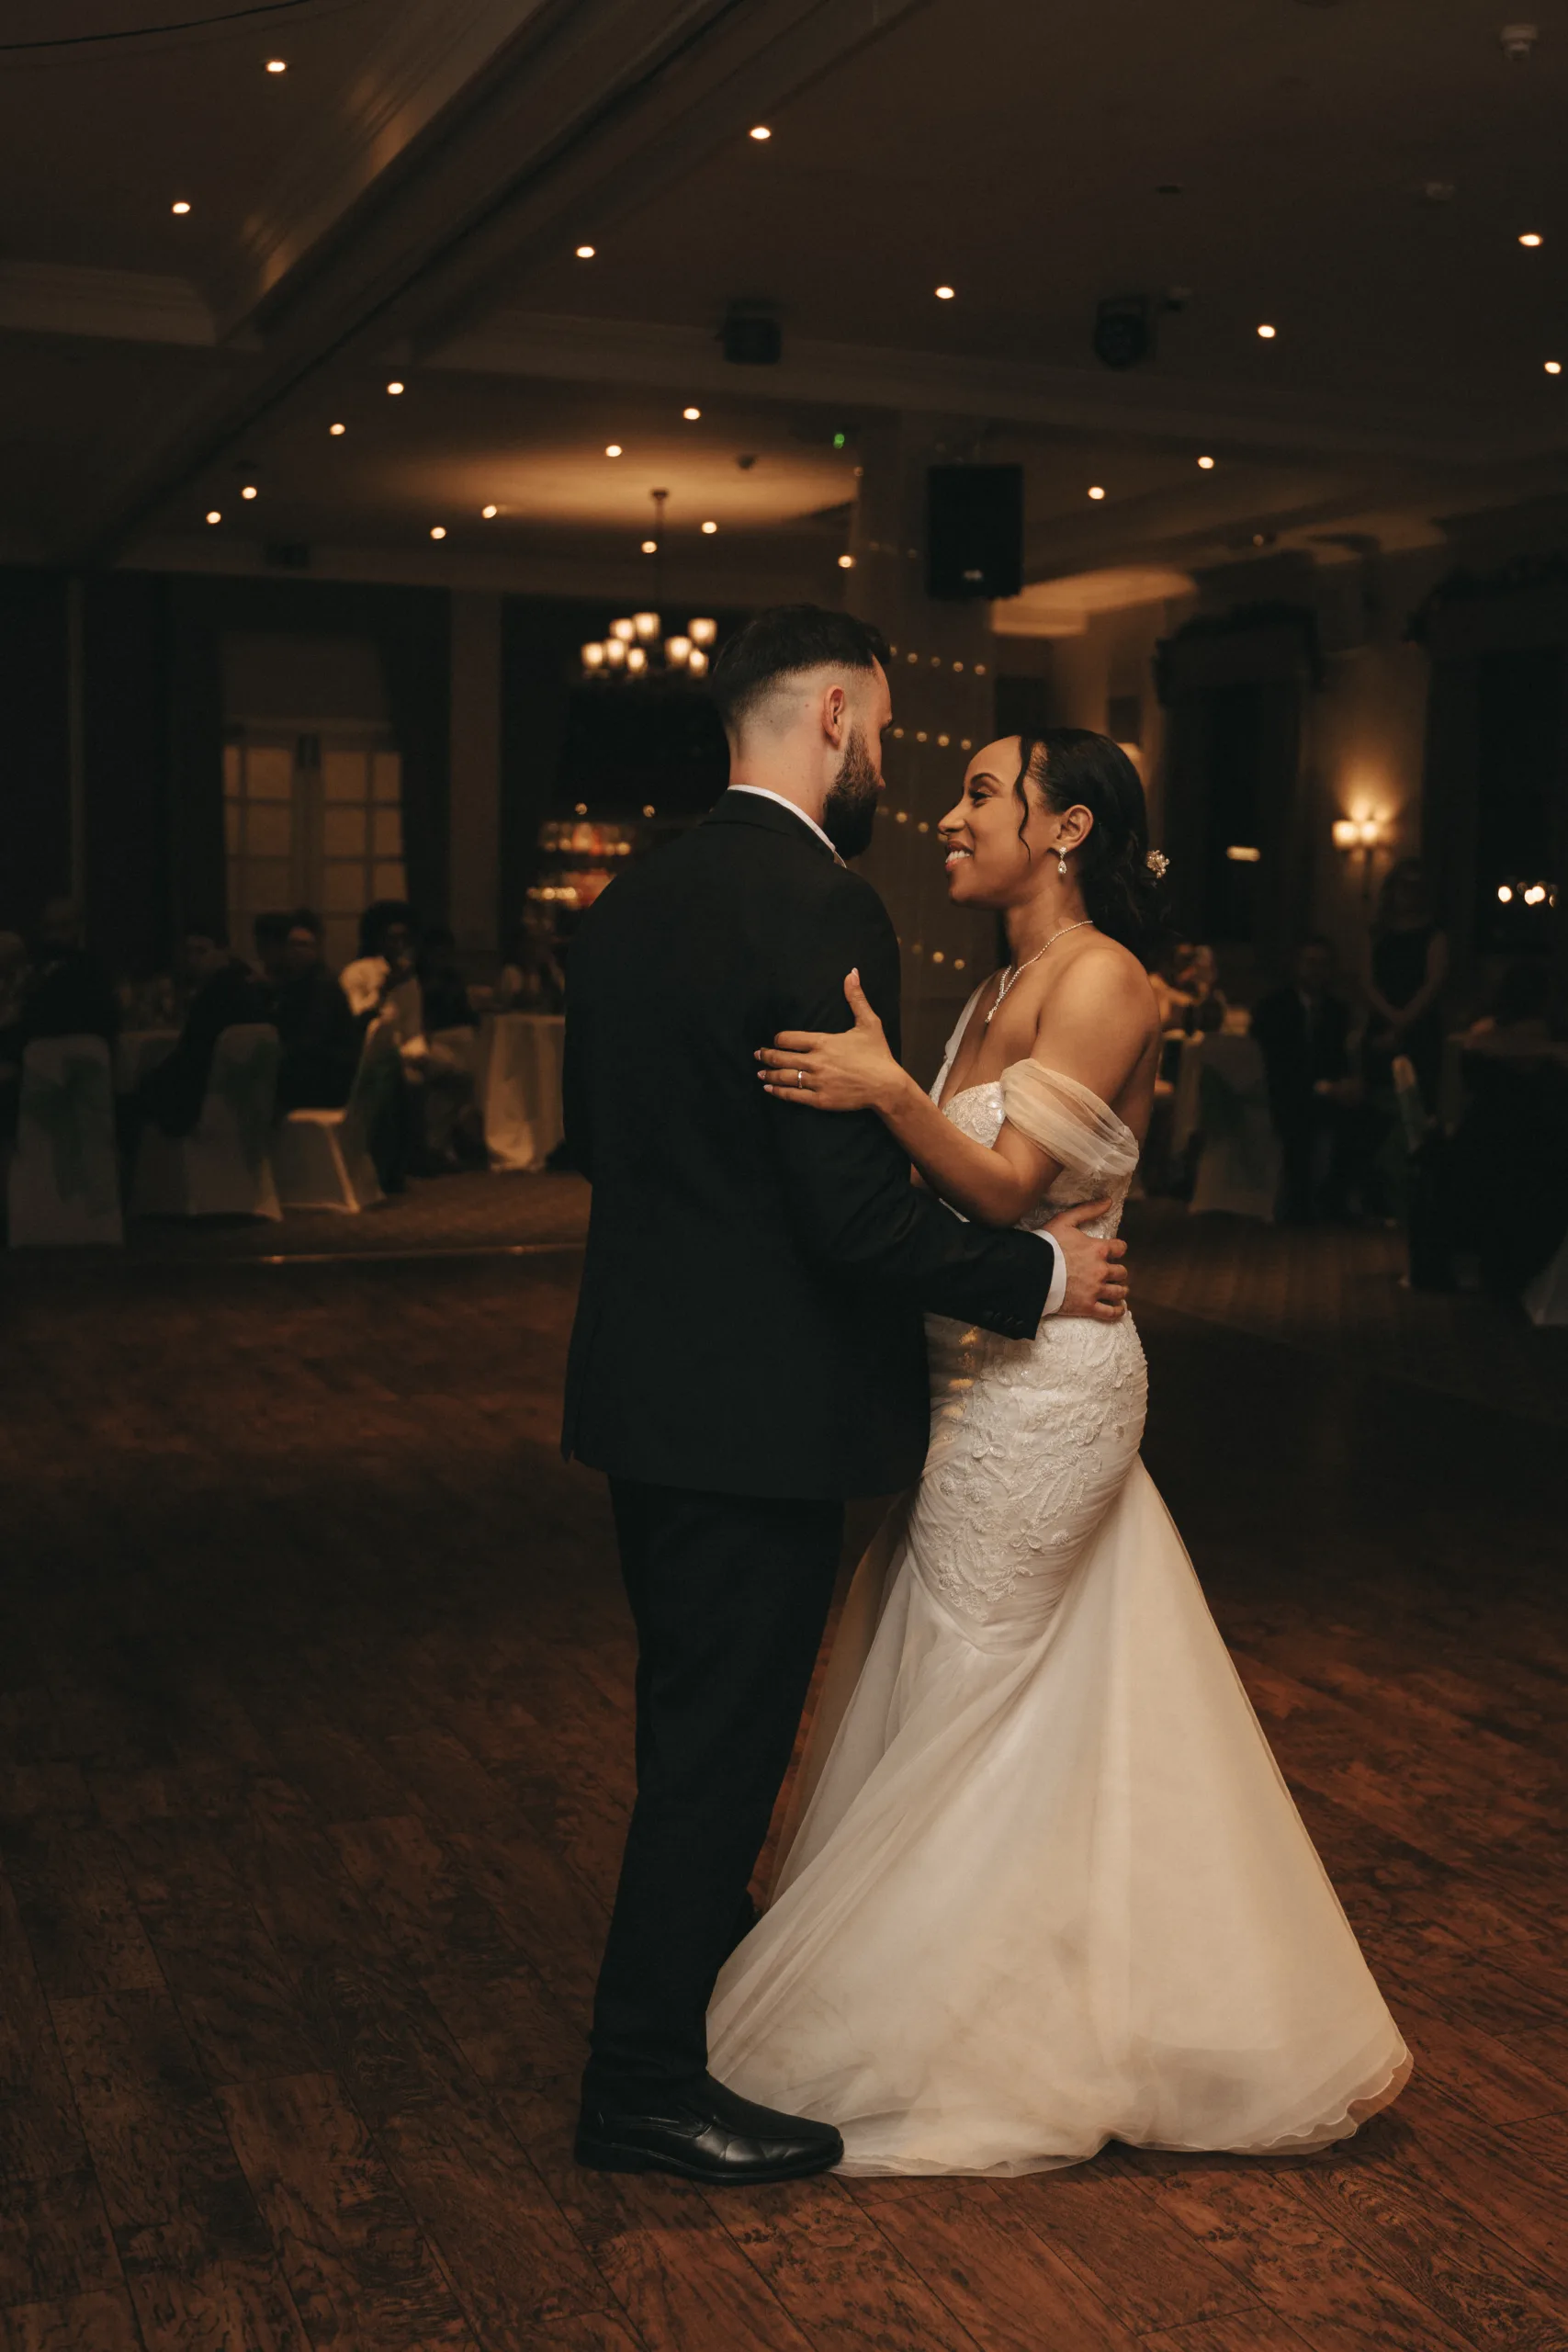 A bride and groom sharing their first dance at a wedding reception in Yorkshire.